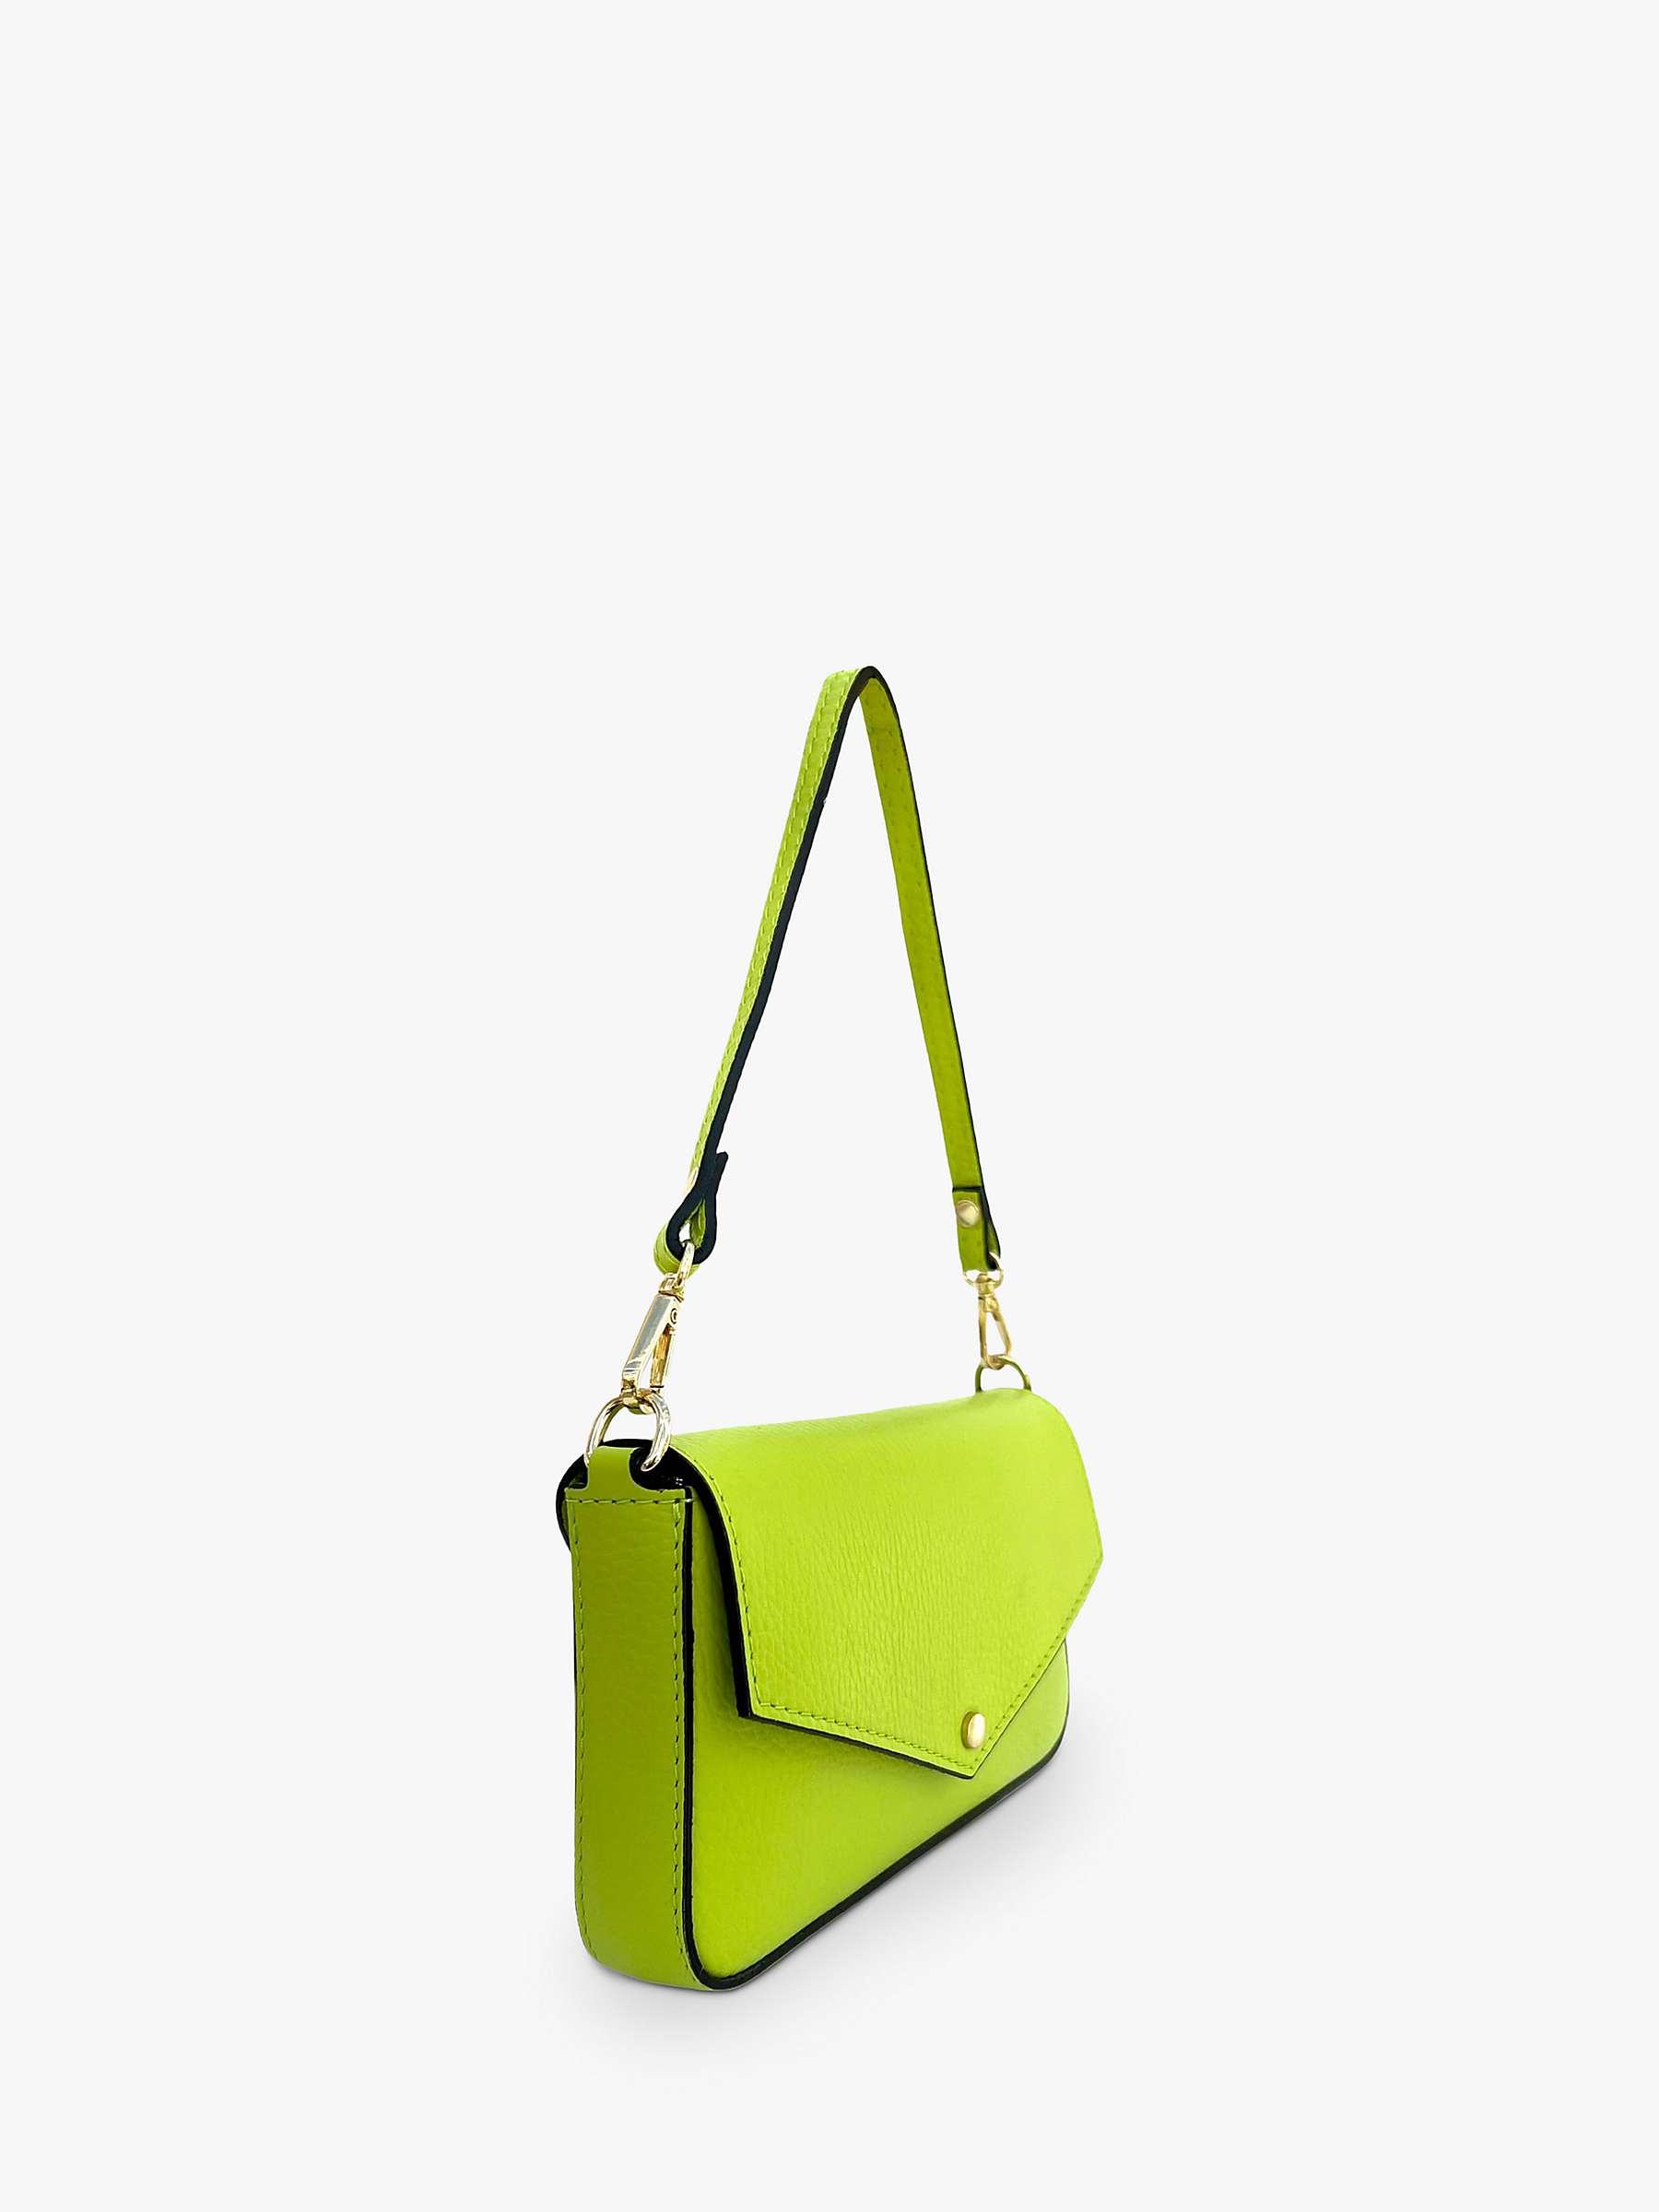 Buy Apatchy The Munro Leather Shoulder Bag Online at johnlewis.com